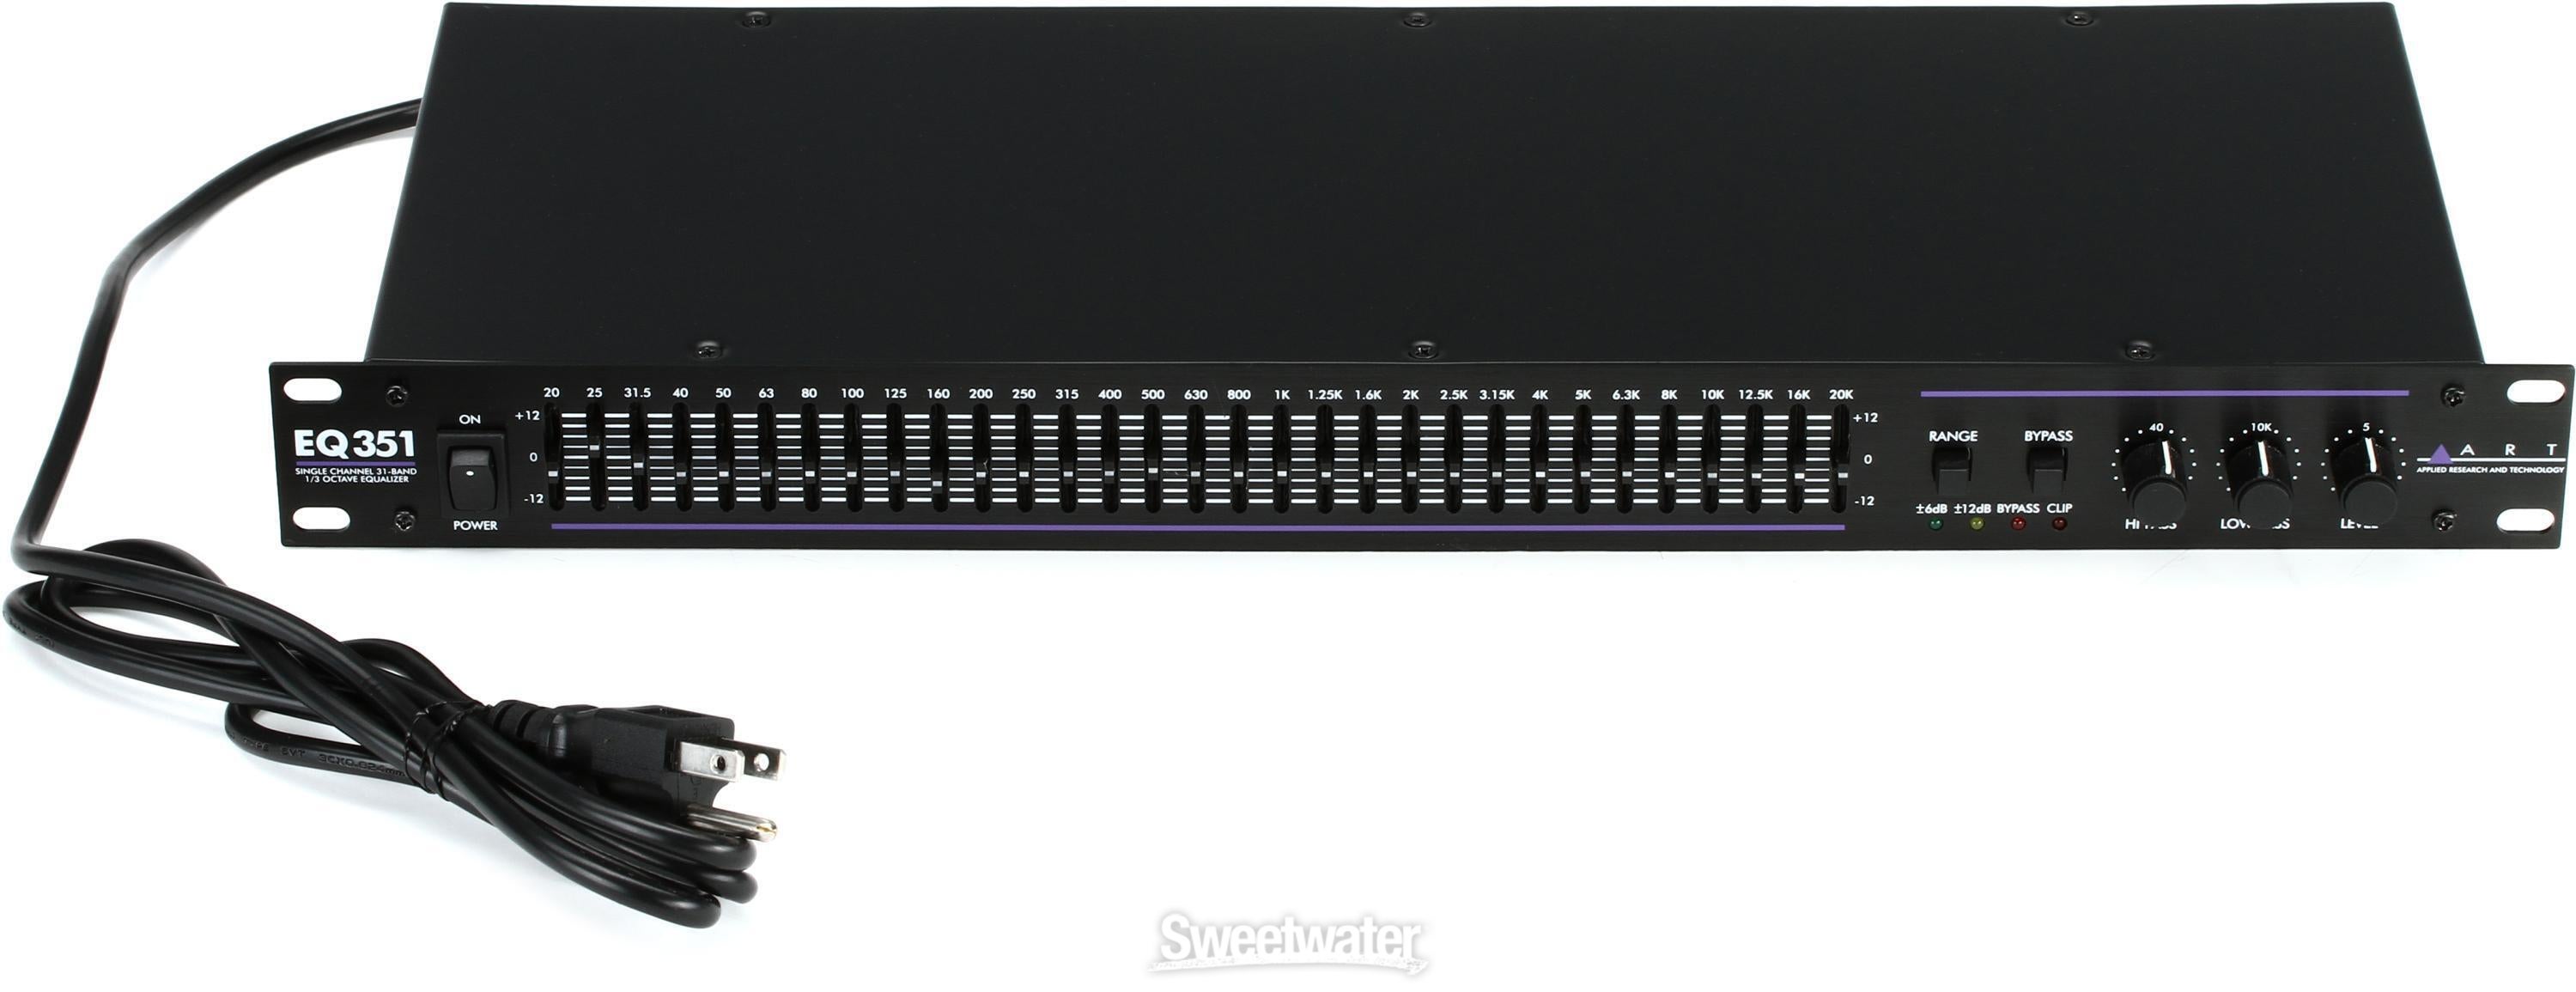 ART EQ-351 31-band Graphic Equalizer | Sweetwater